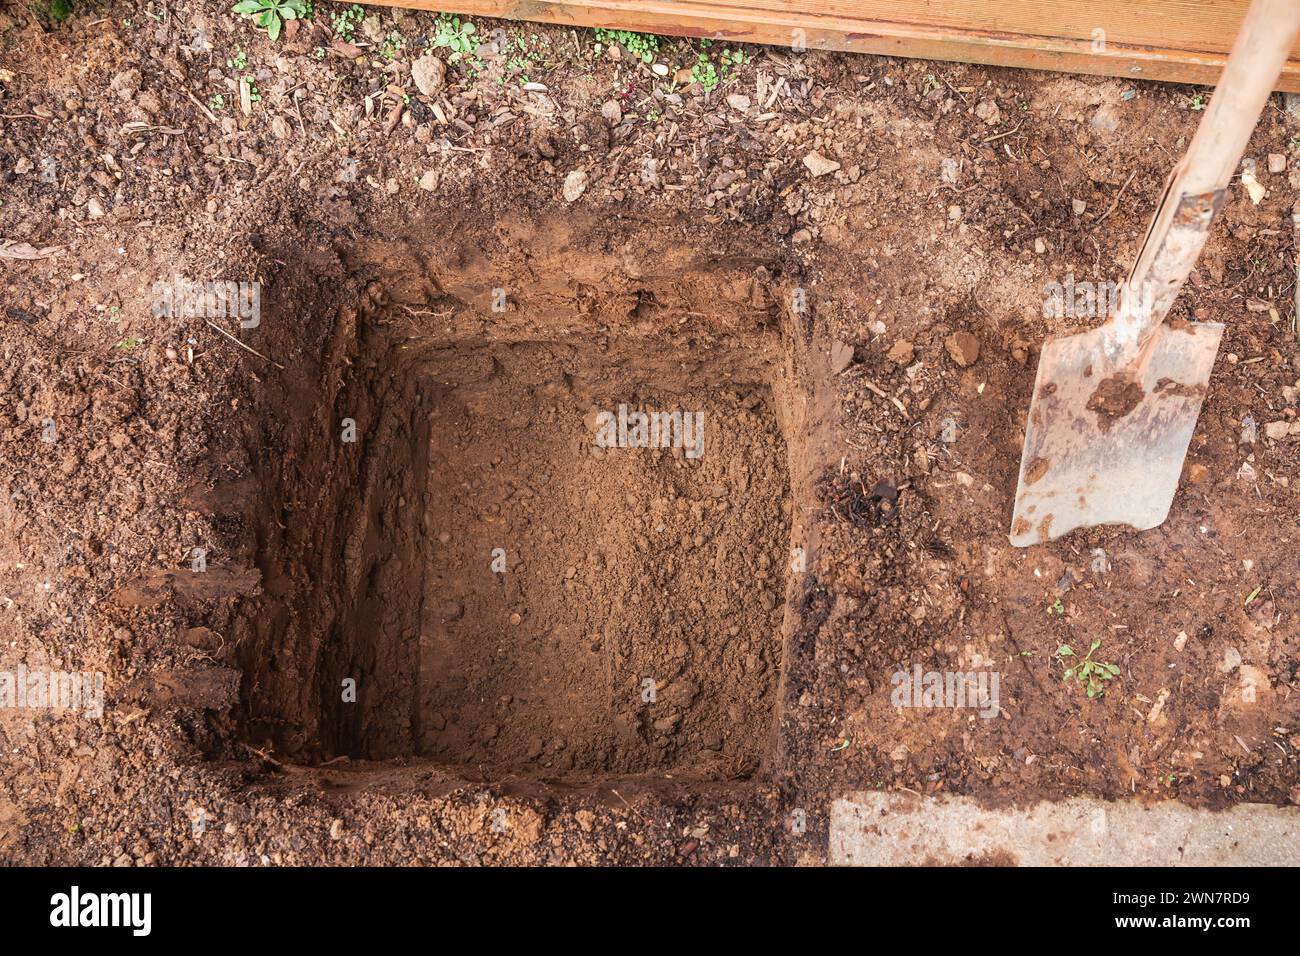 Hole in a soil, prepared for planting or construction, pit in a ground with shovel Stock Photo